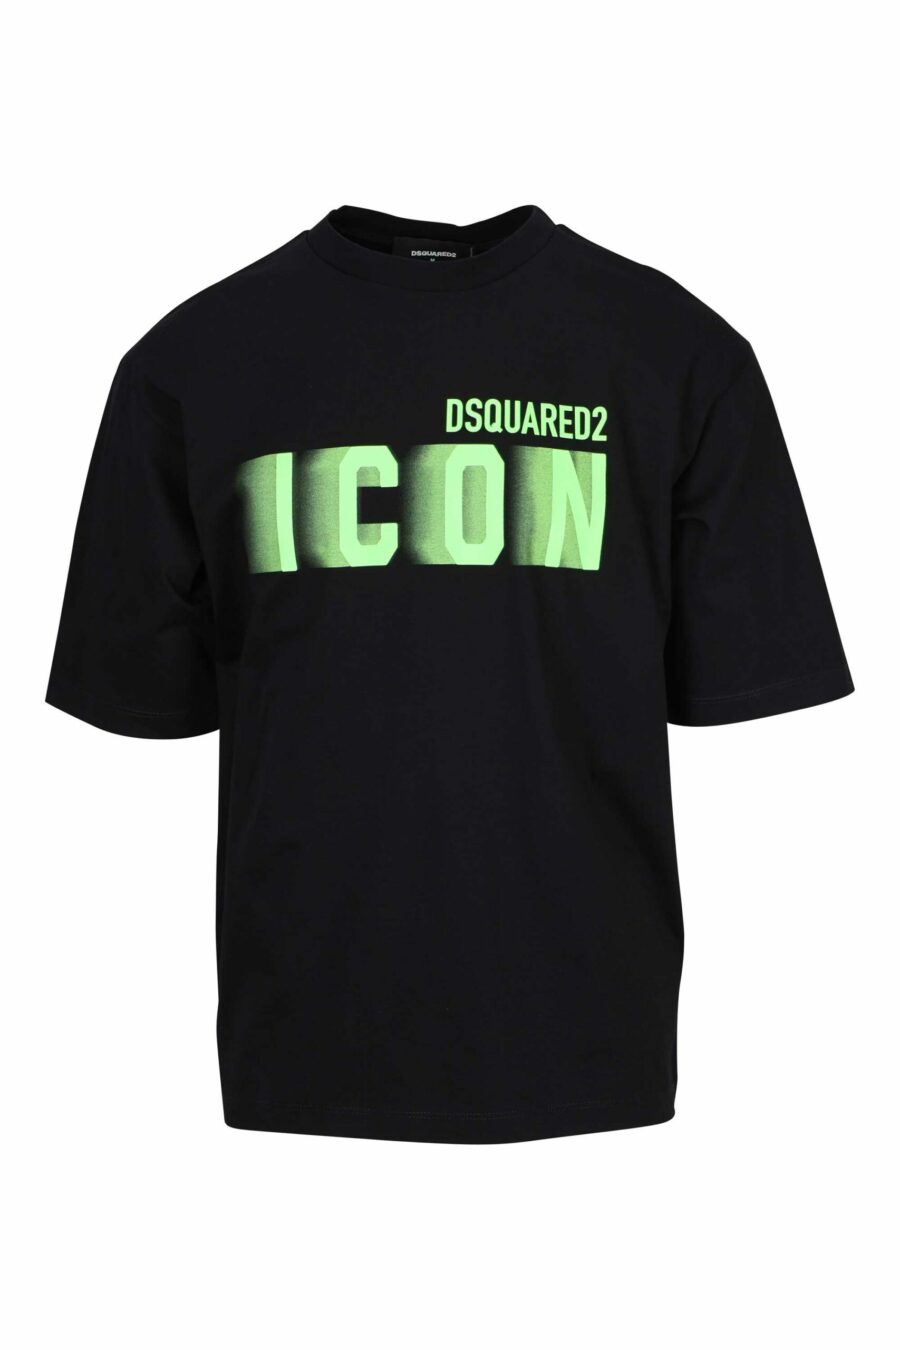 Black oversize T-shirt with neon green blurred "icon" maxilogo - 8054148359669 scaled